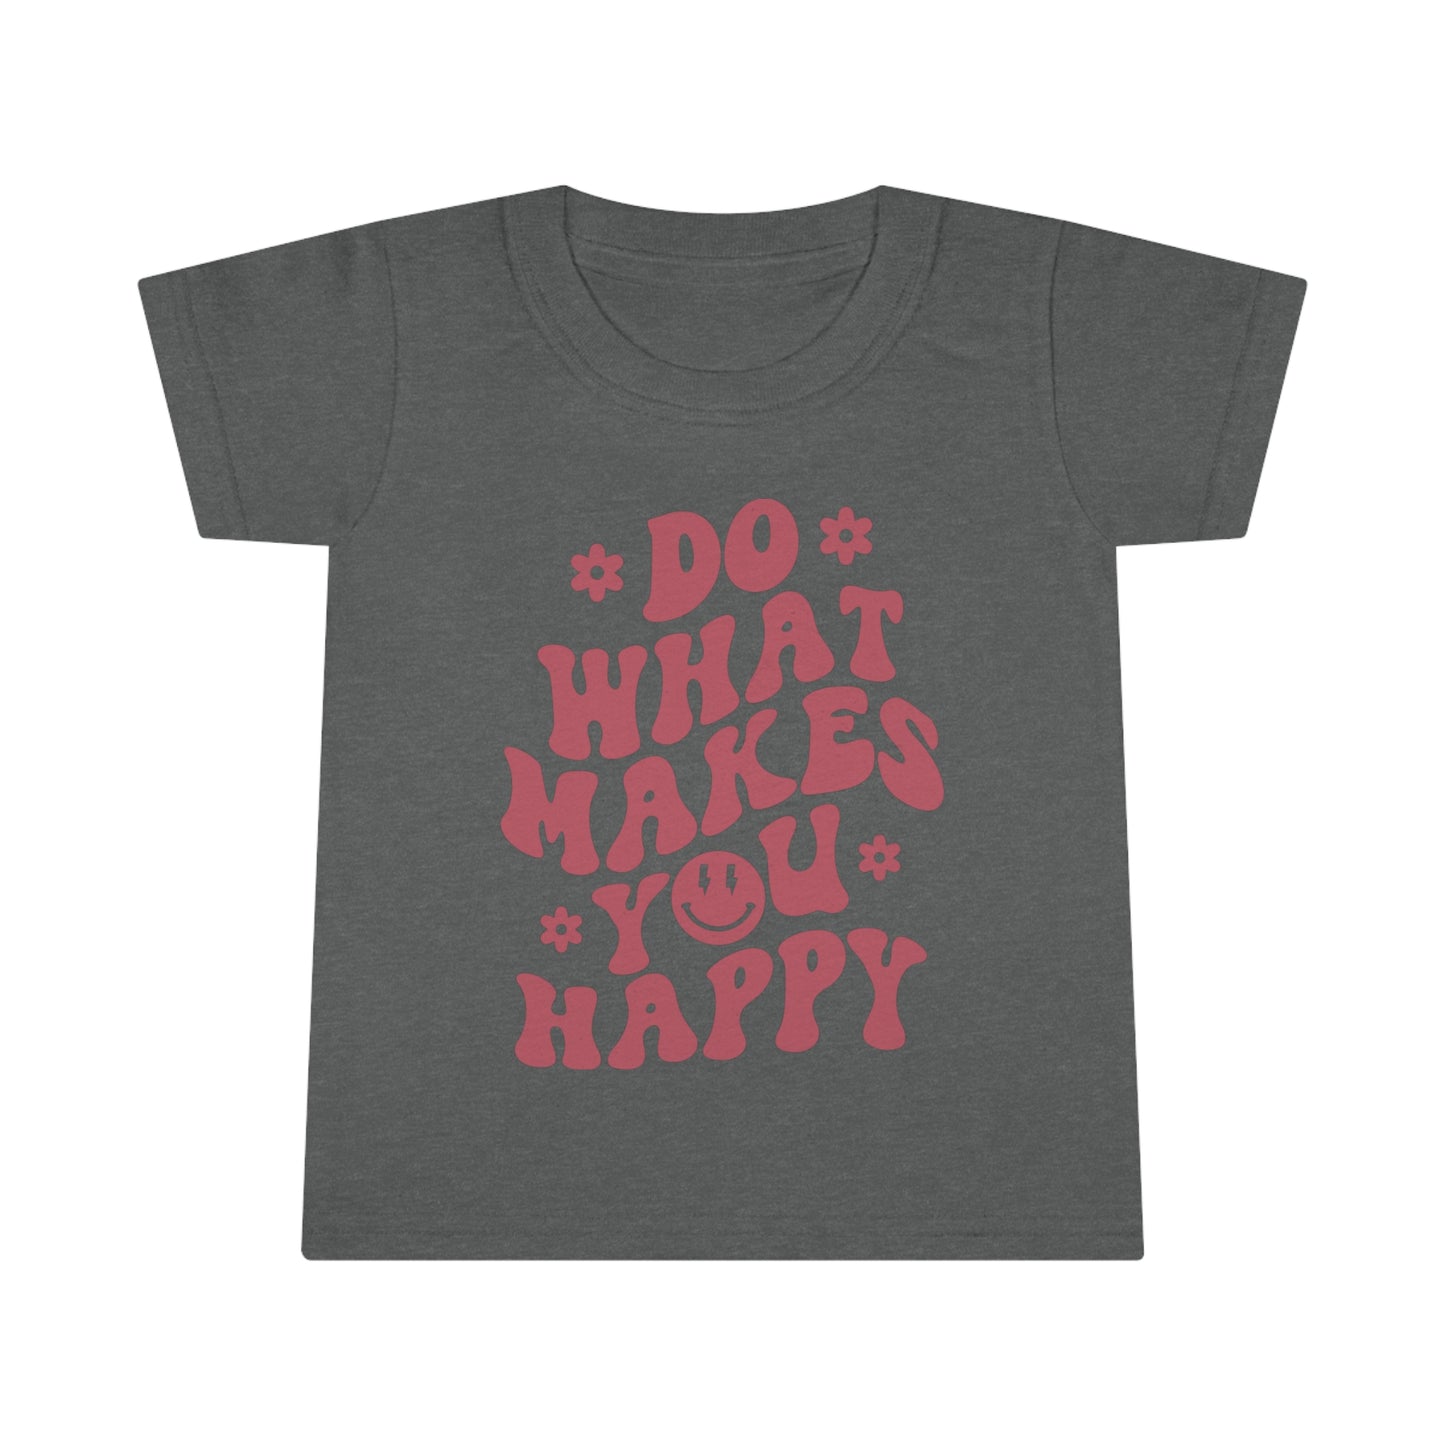 Do what makes you happy - Toddler T-shirt